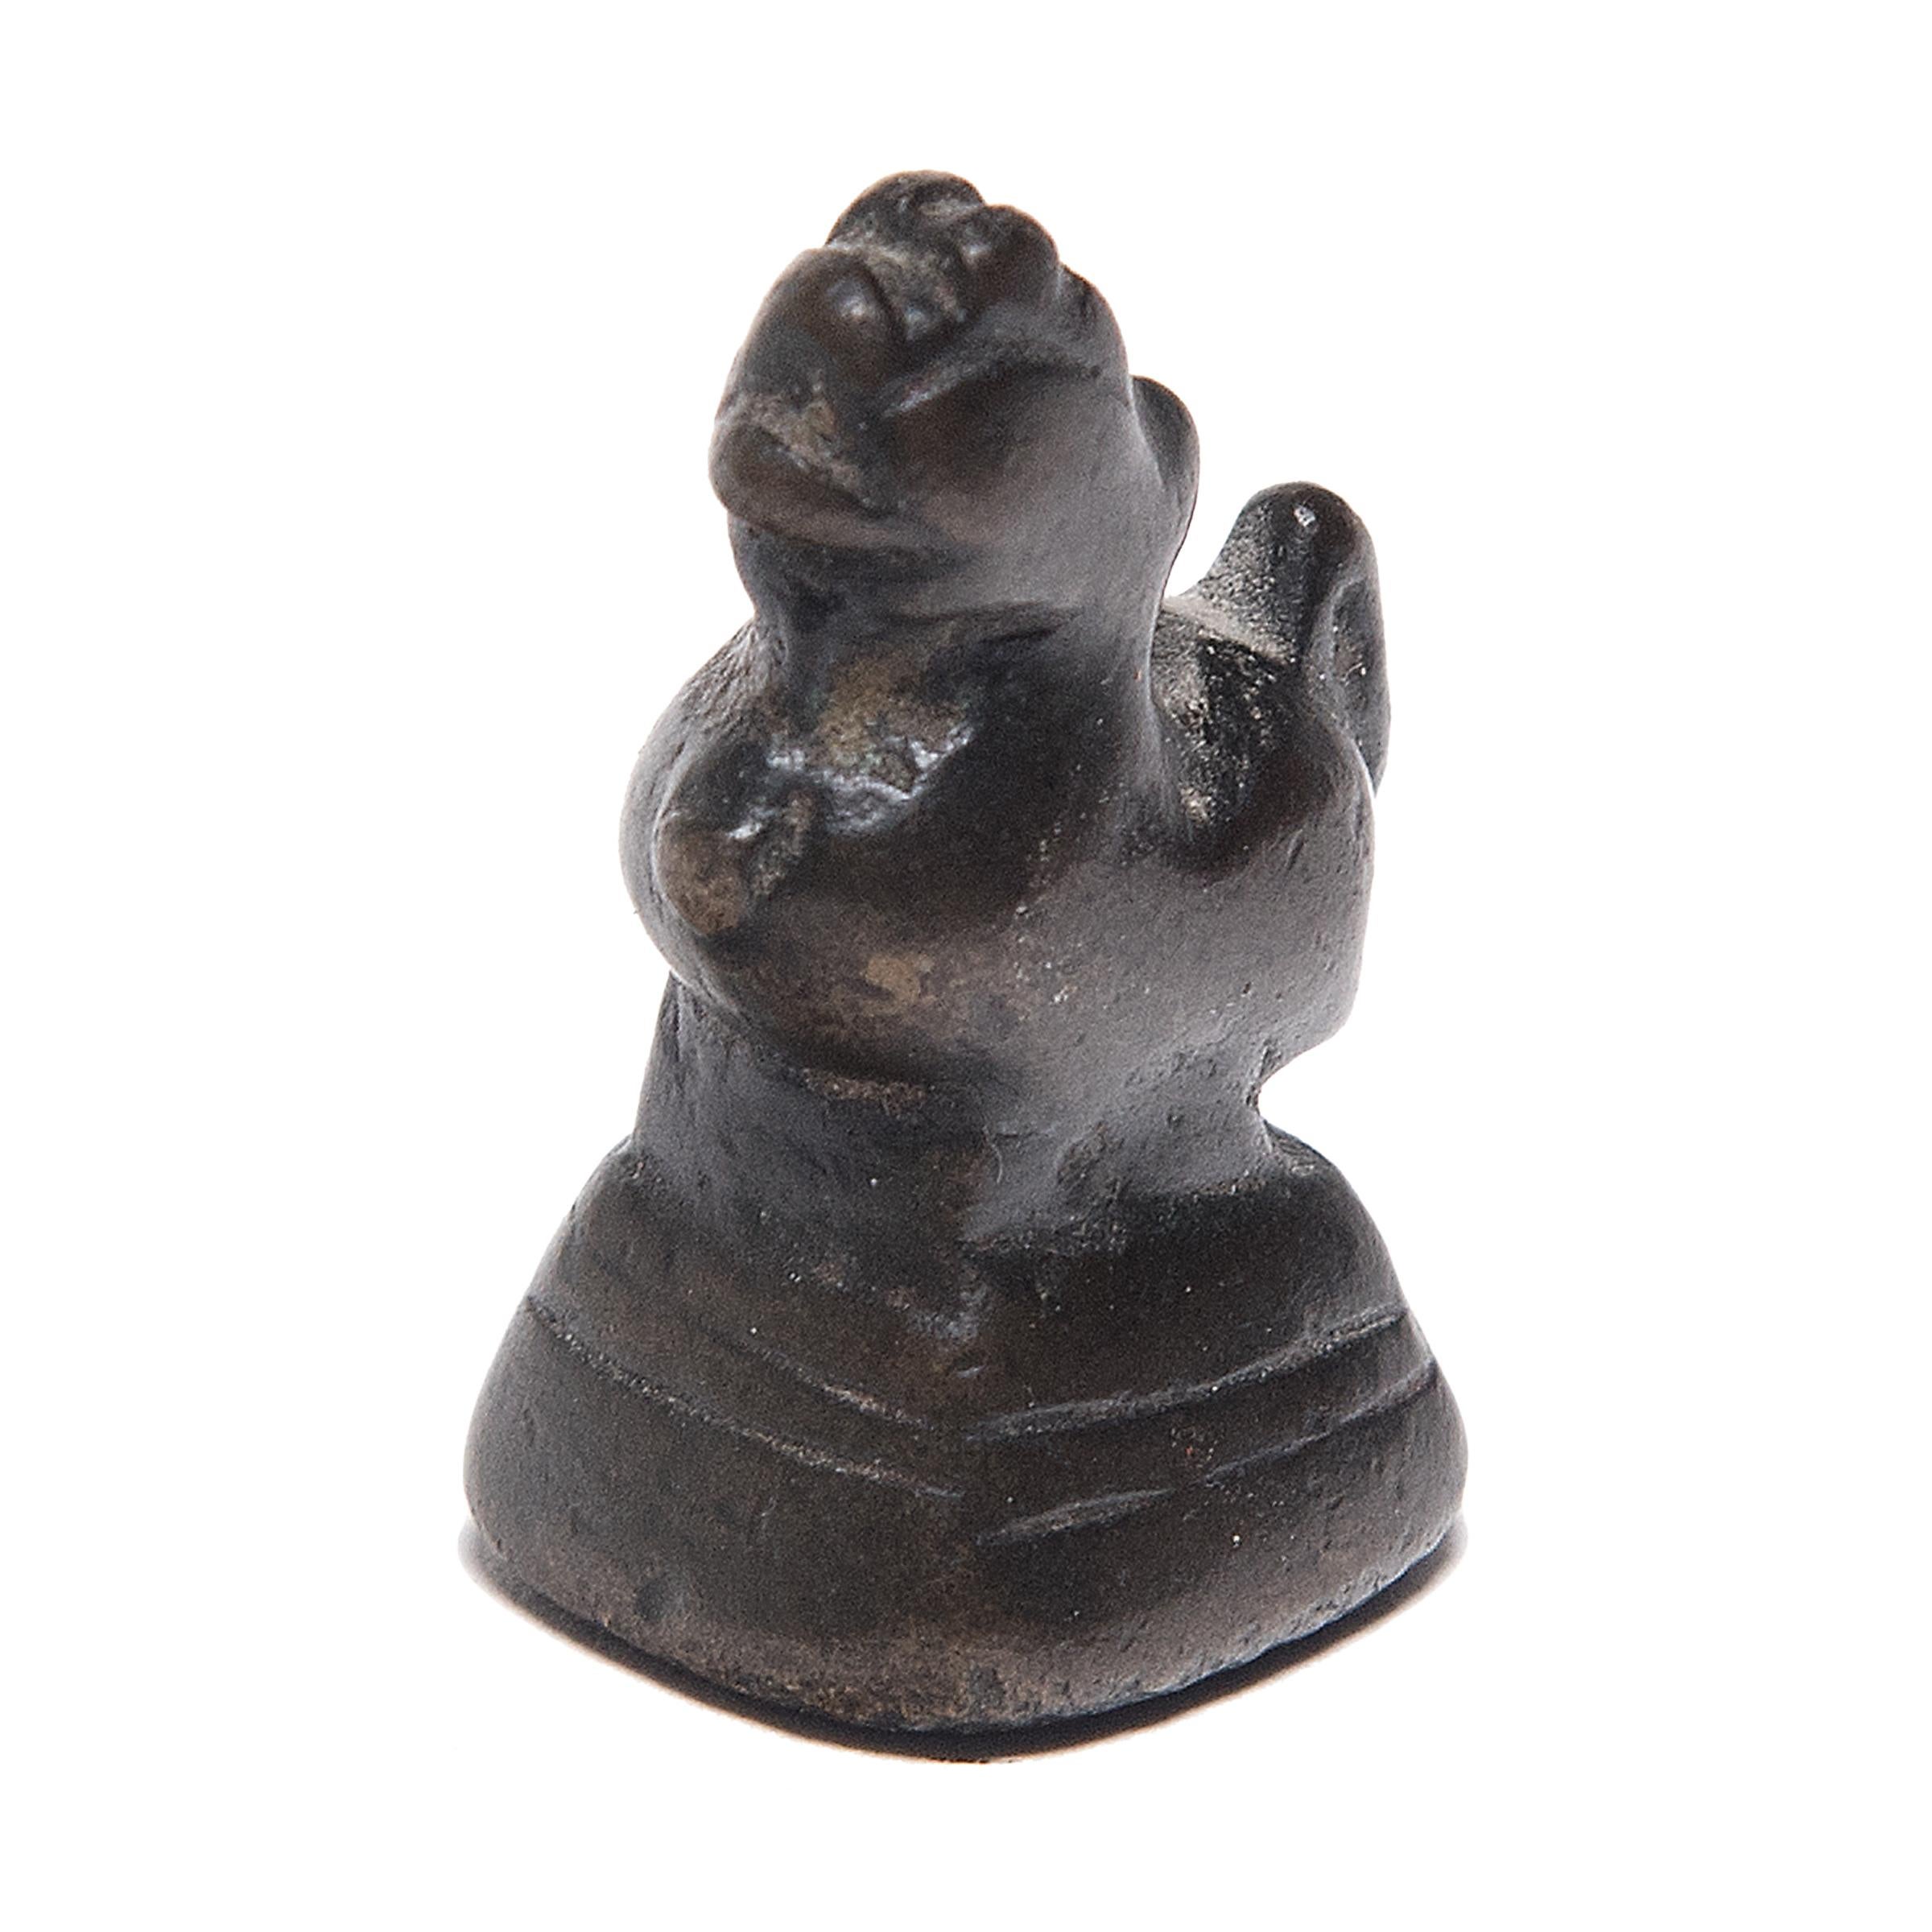 Whether used to parcel out opium, spices, or other valuable goods, these small figurines were originally used as counterweights for a tabletop balance. The petite weights are cast in bronze in the form of animals - two as roosters and one as a